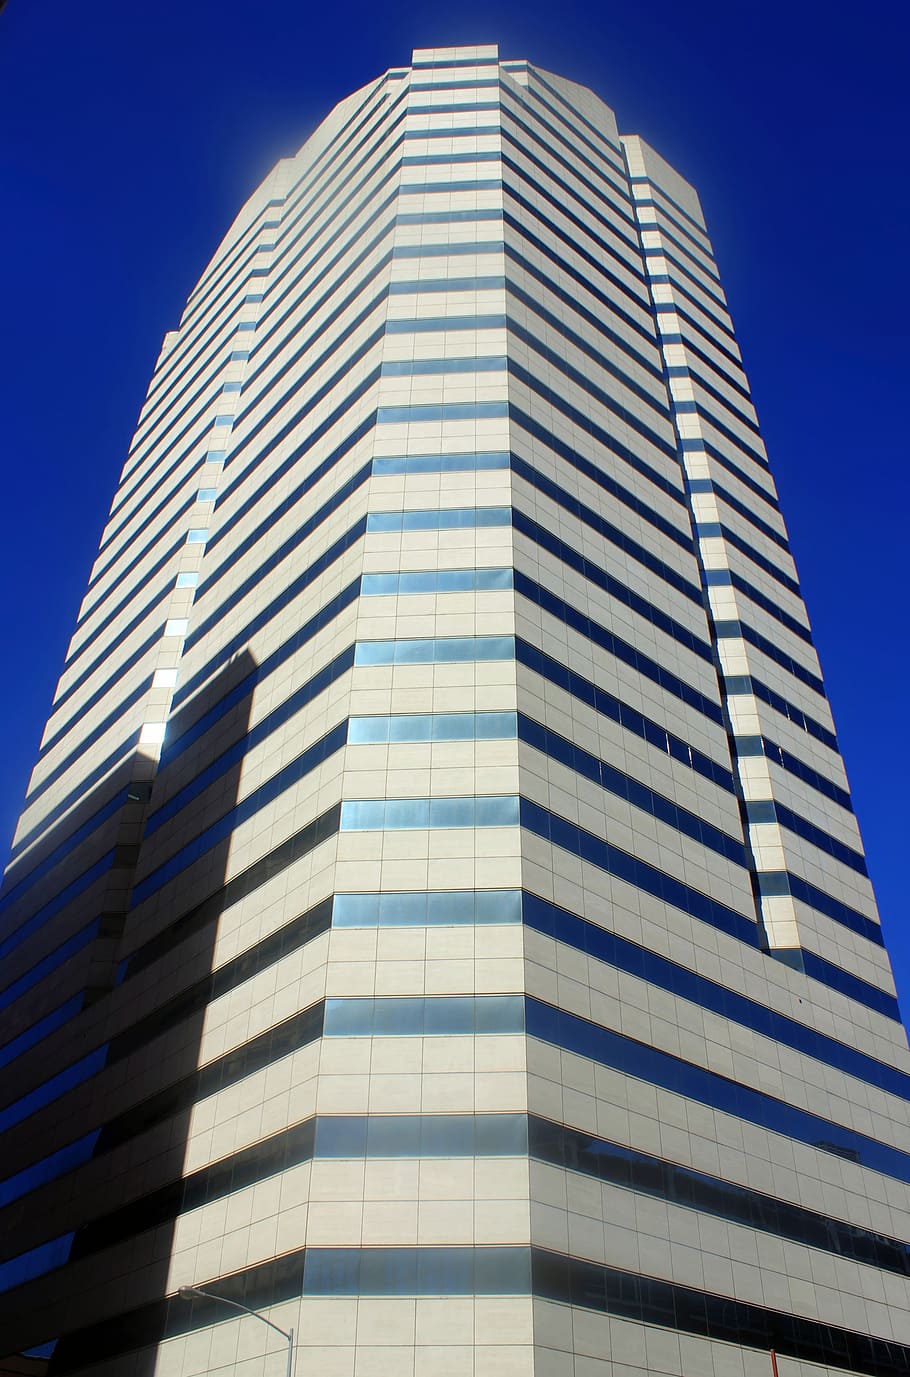 houston, texas, usa, skyscraper, high rise, tower, downtown, low angle view, architecture, building exterior